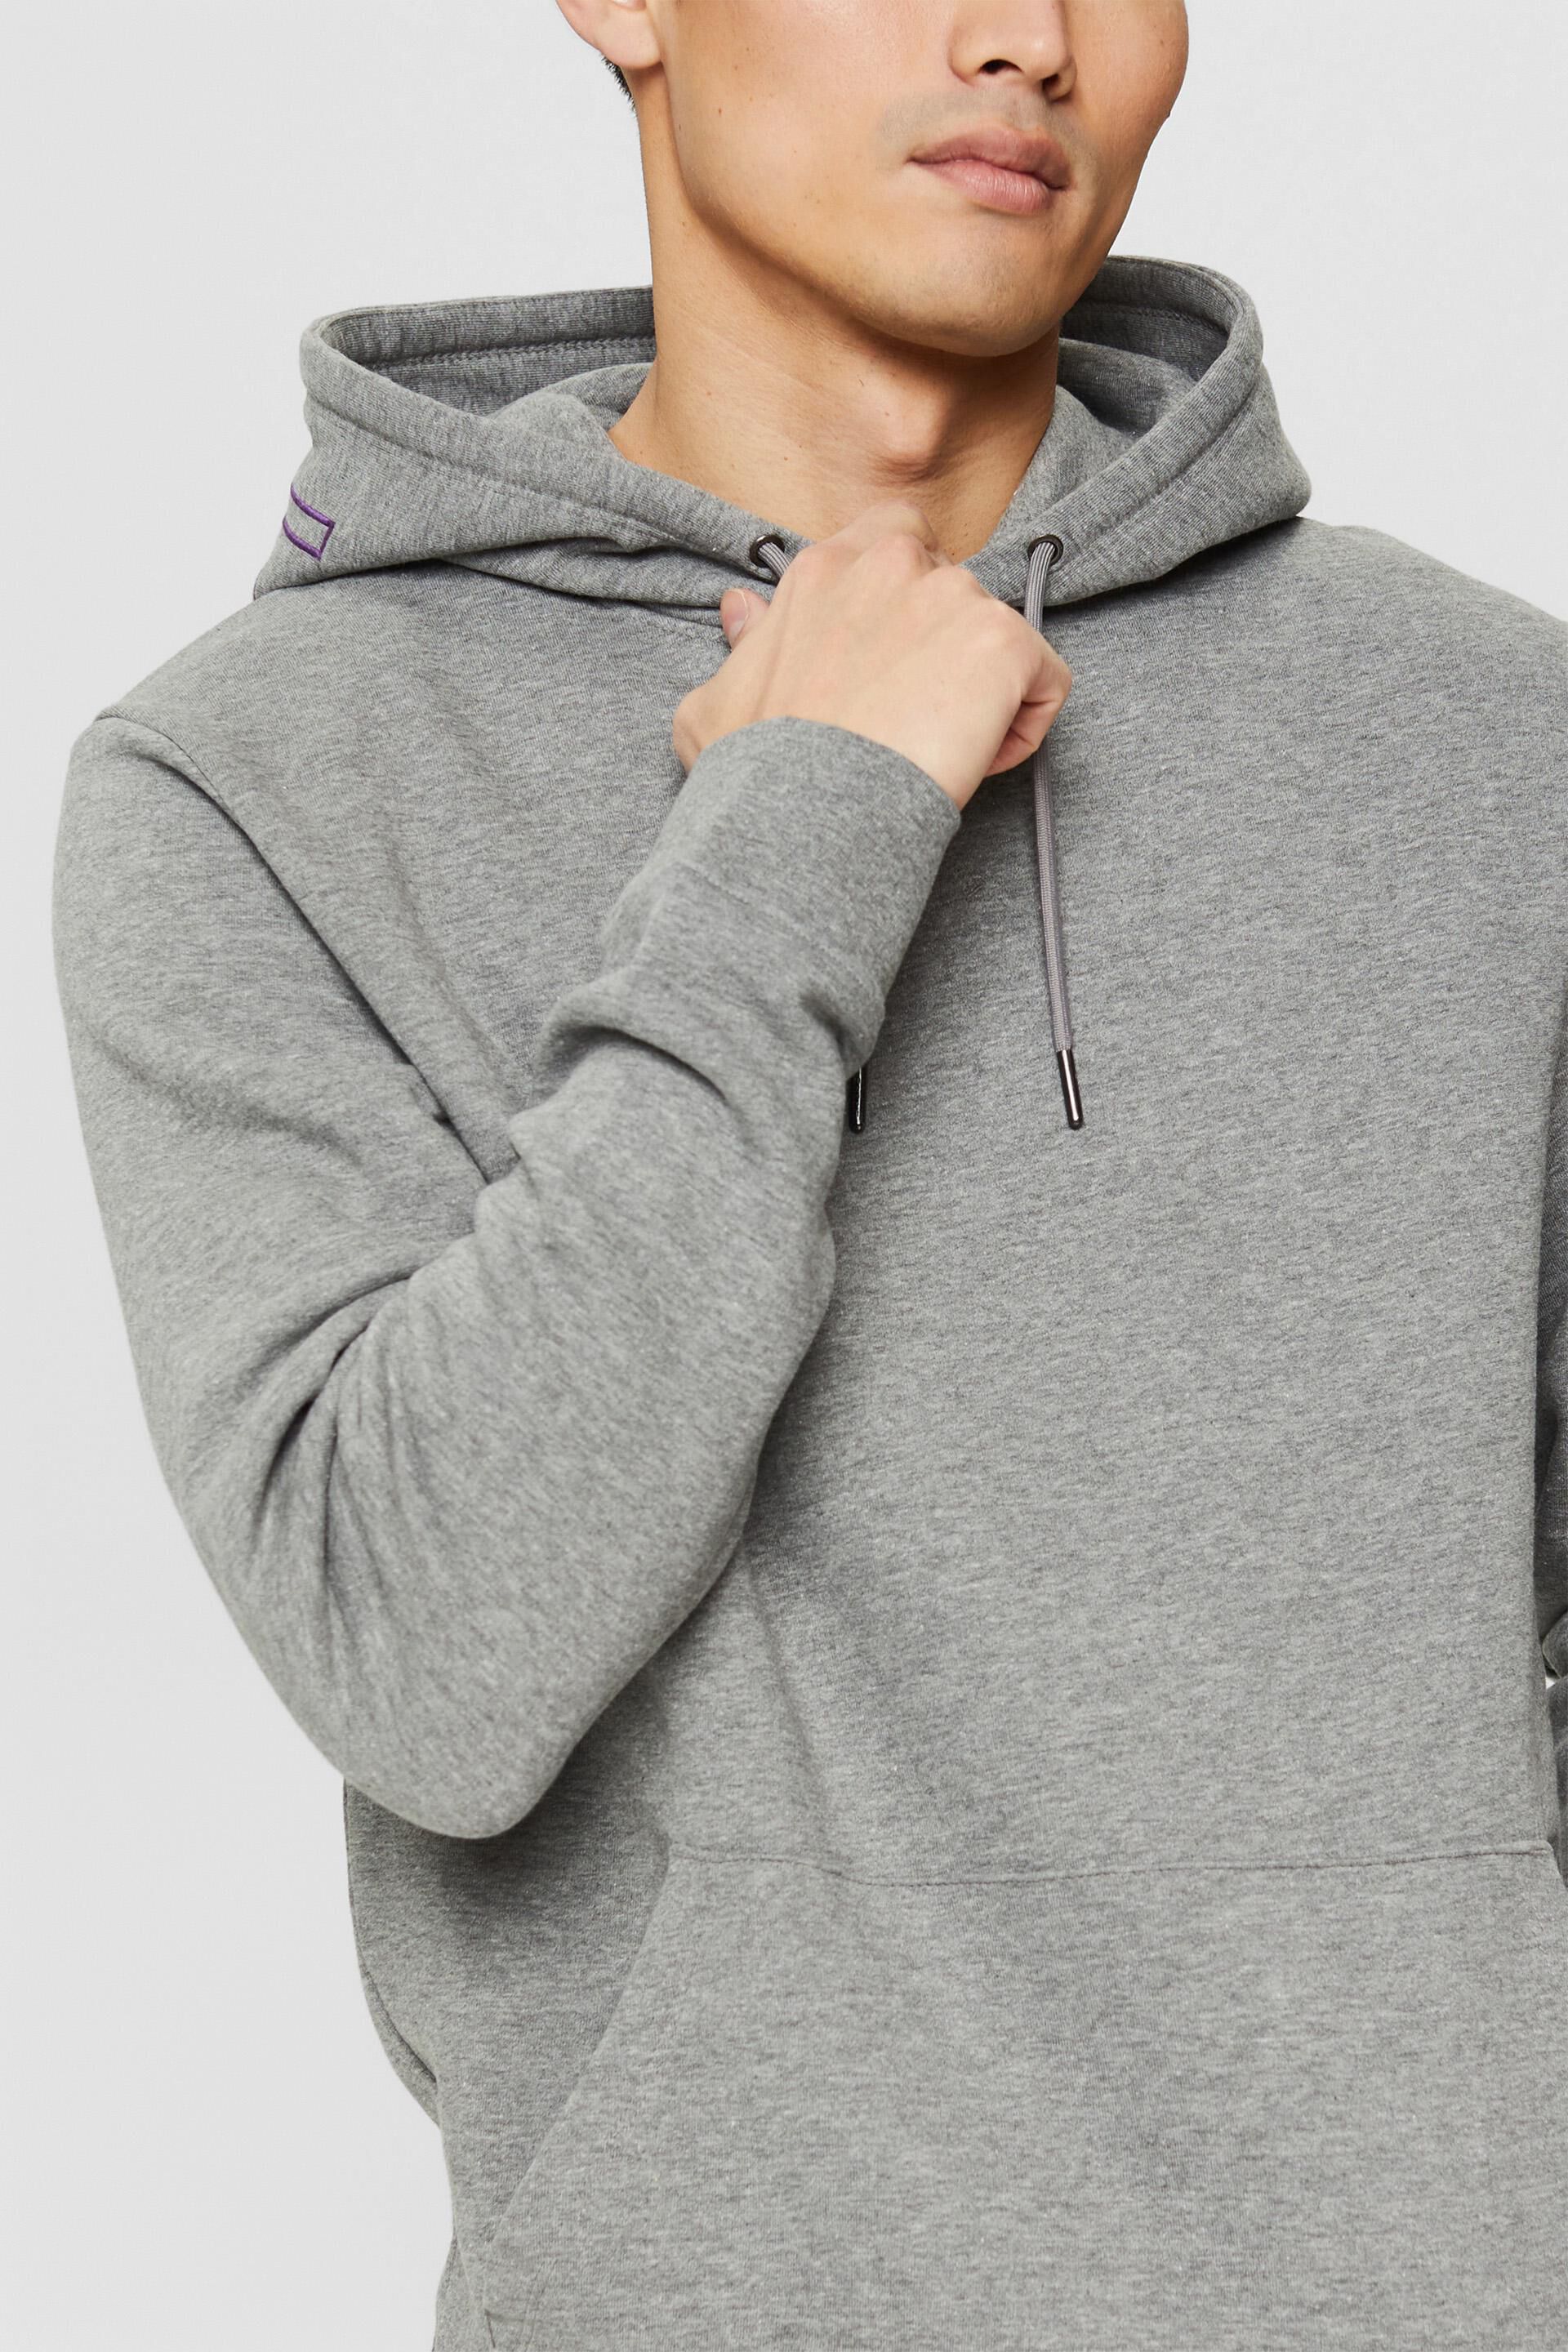 Esprit material: embroidery sweatshirt logo with hoodie recycled Made of